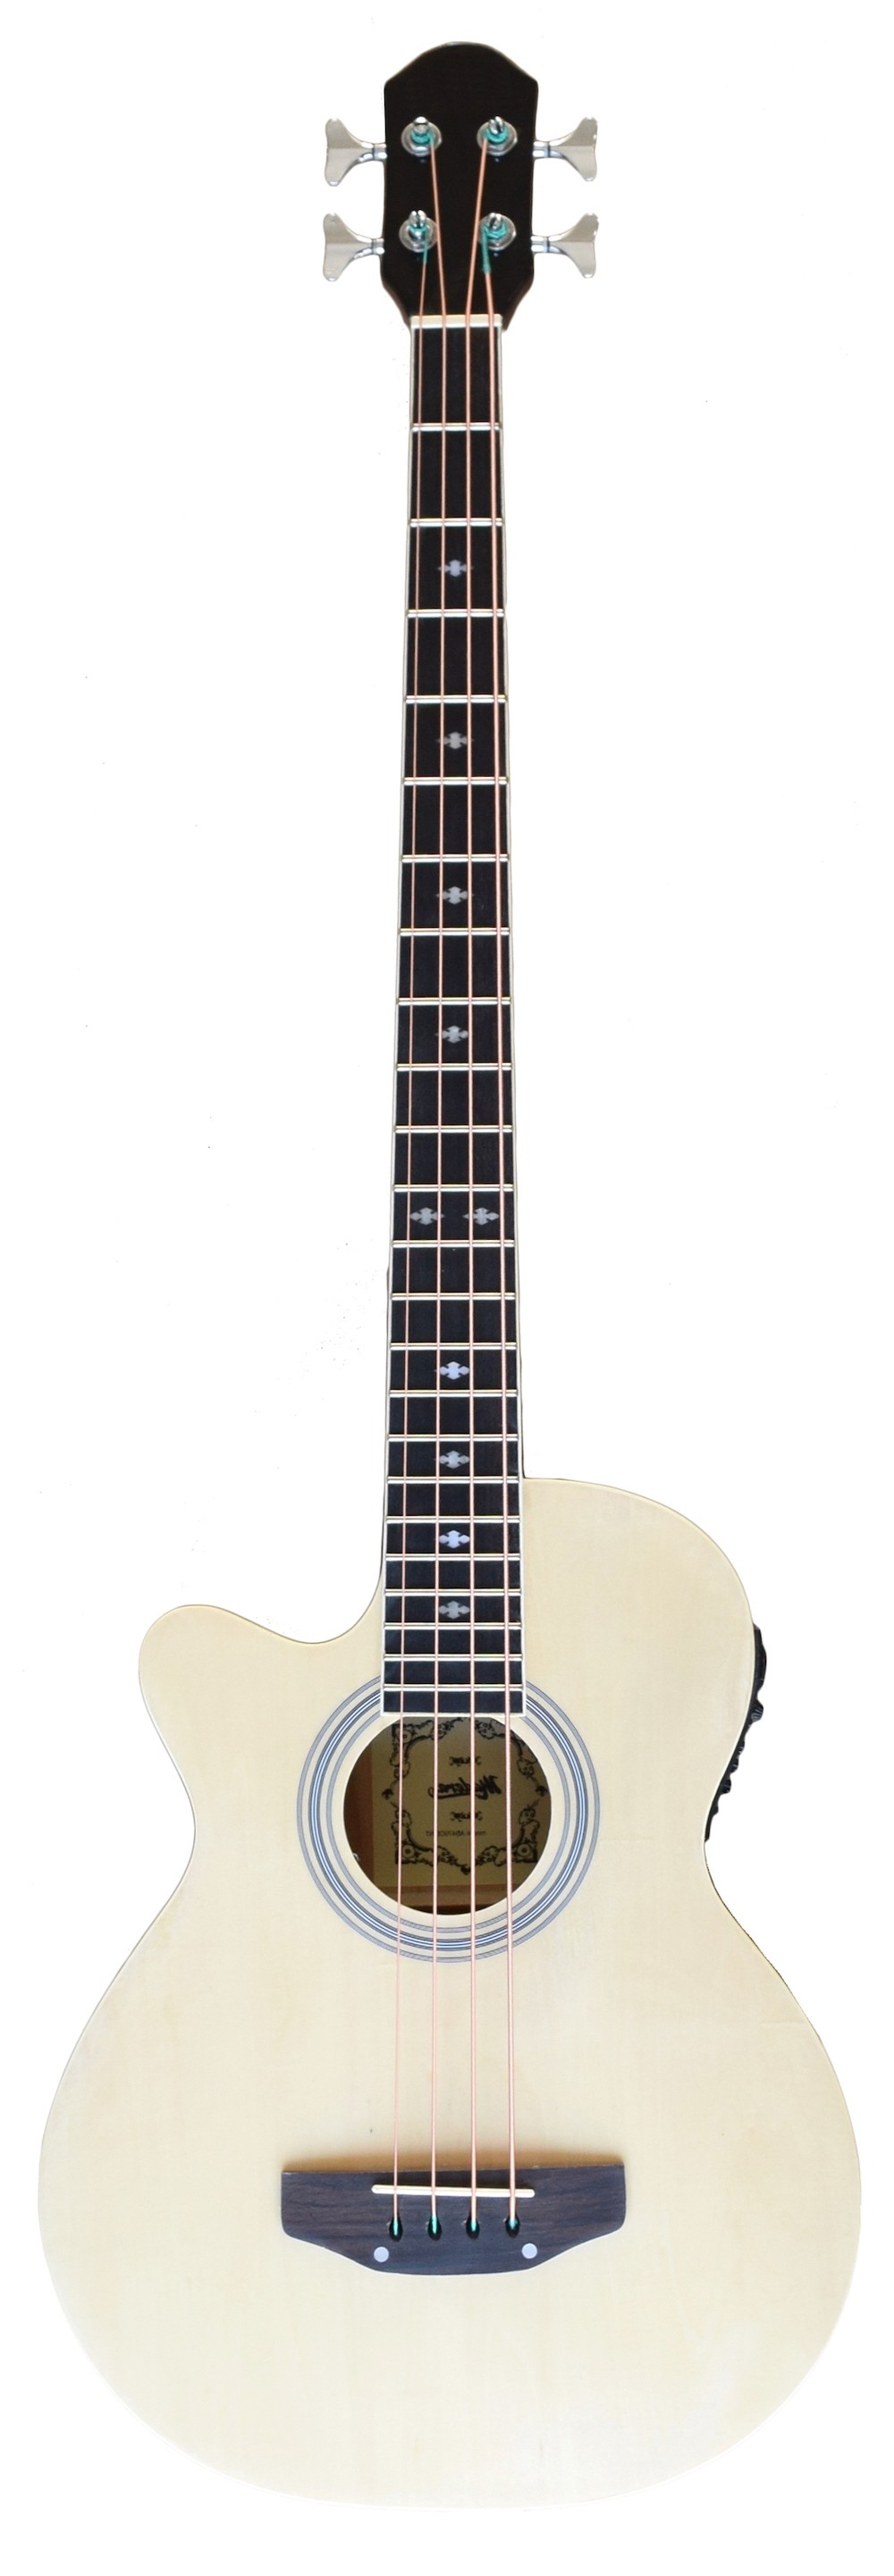 MADERA AB470CE LEFT-HANDED ACOUSTIC BASS - NATURAL